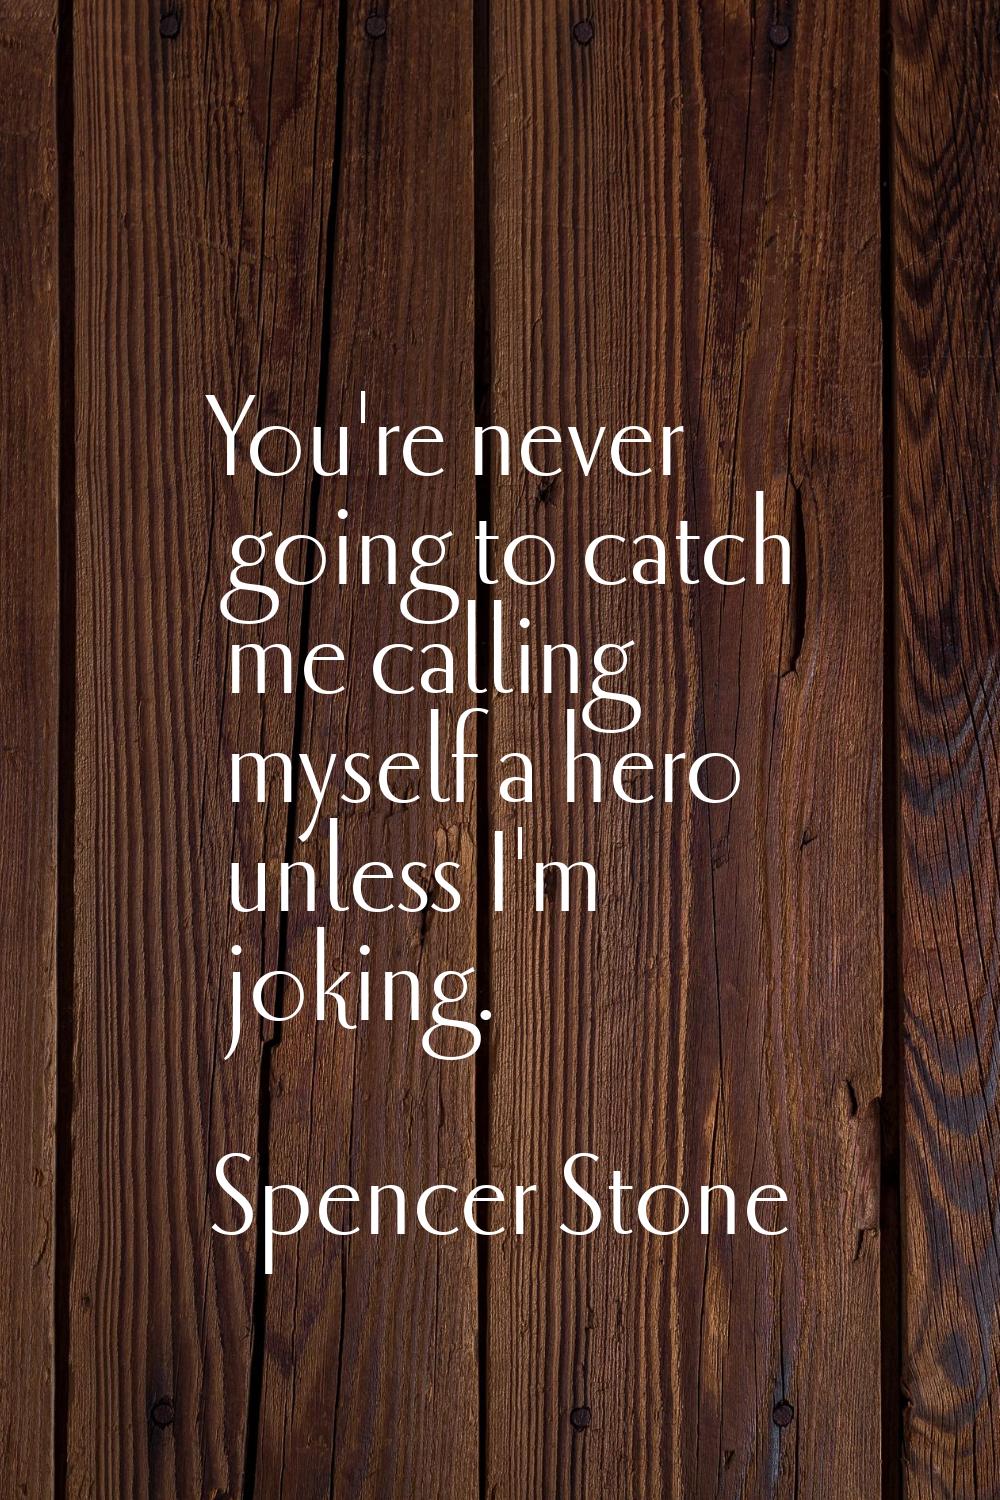 You're never going to catch me calling myself a hero unless I'm joking.